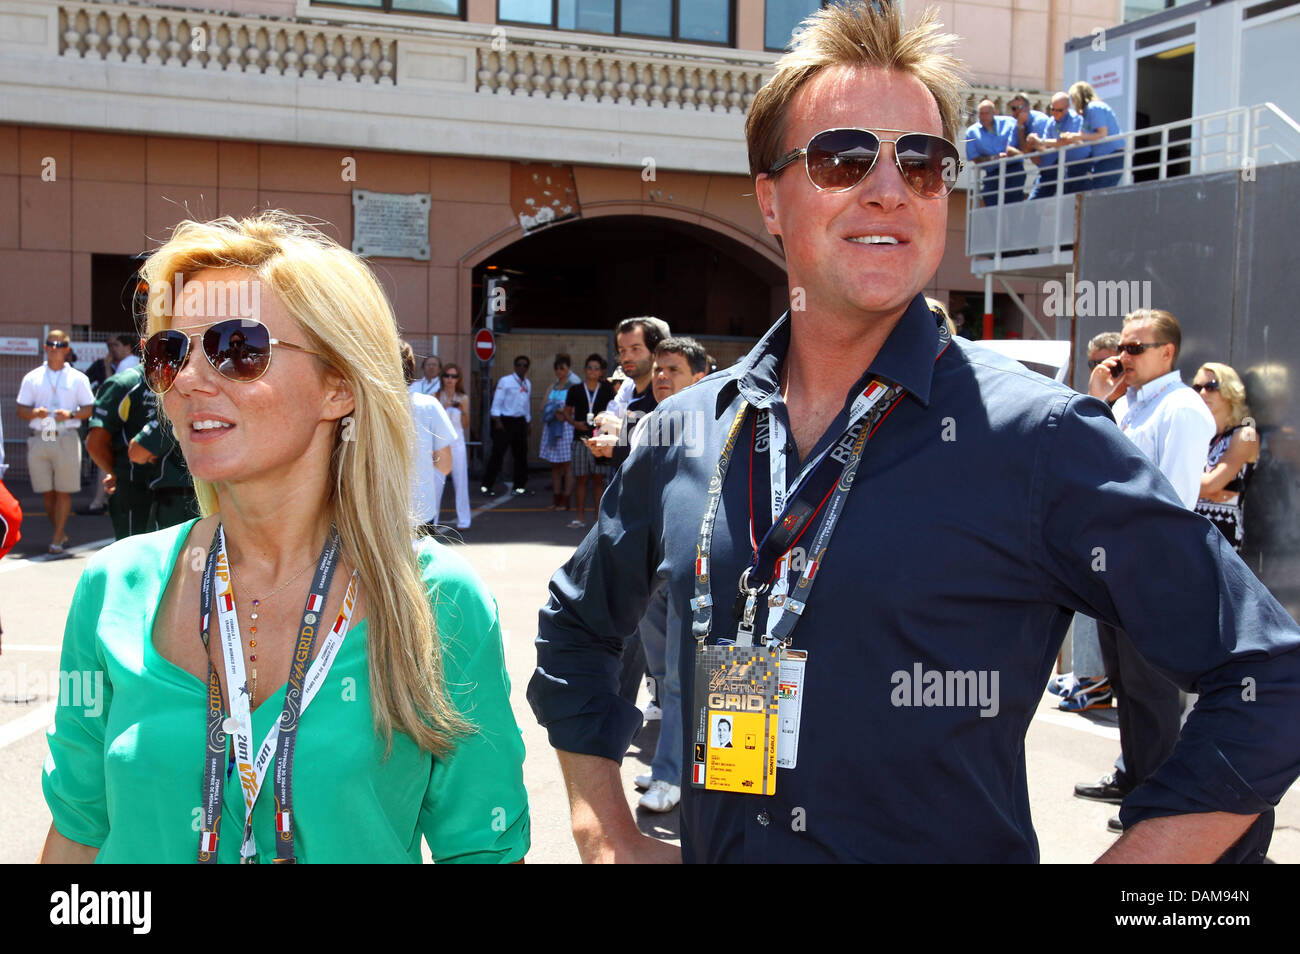 Former Spice Girl singer Geri Halliwell seen before the start at the F1 race track of Monte Carlo, Monaco, 29 May 2011. The Monaco Formula One Grand Prix is the sixth of 19 season races and comprises 78 laps. Photo: Jens Buettner Stock Photo